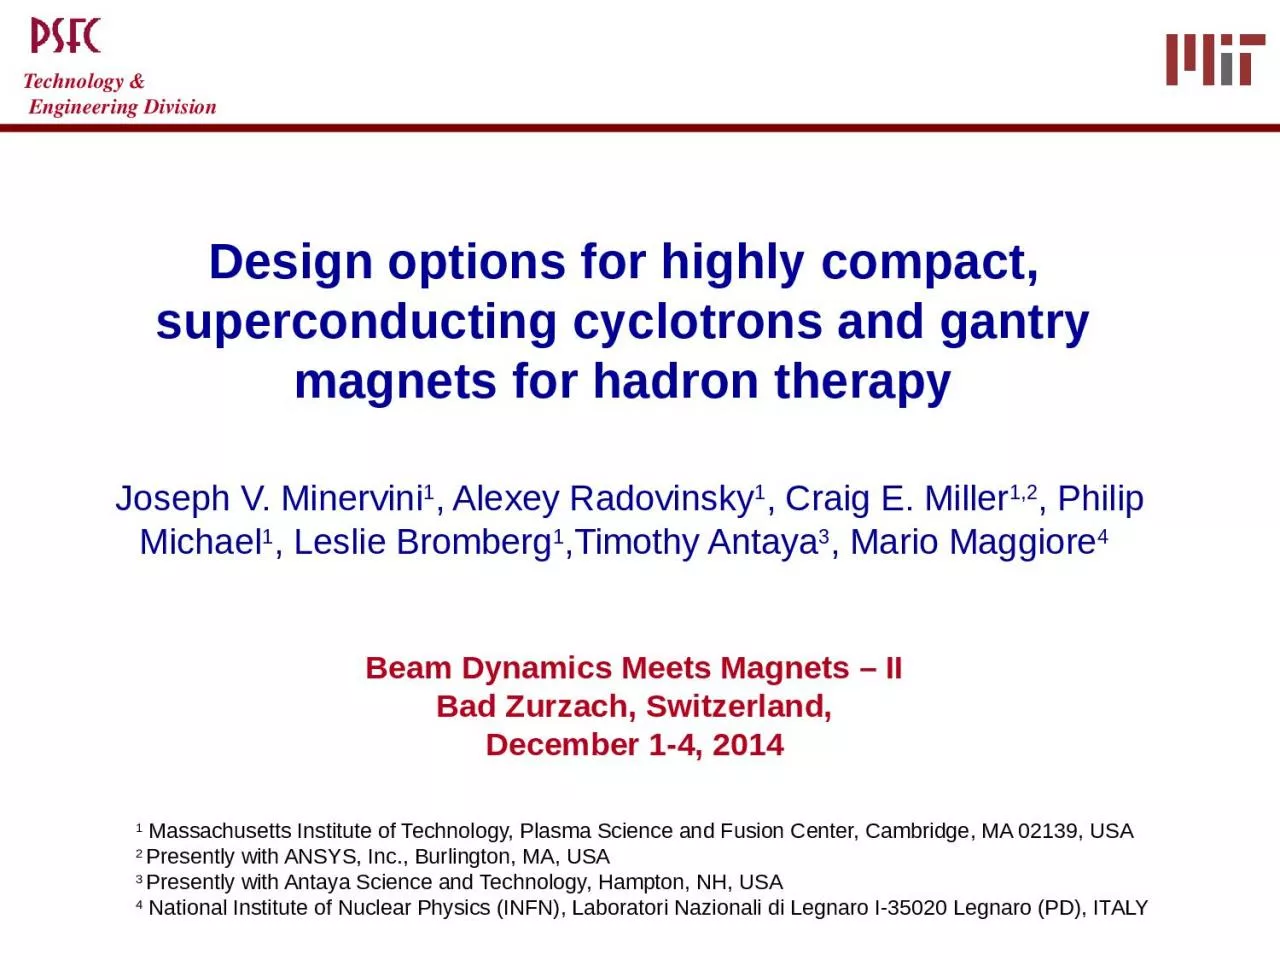 Design  options for highly compact, superconducting cyclotrons and gantry magnets